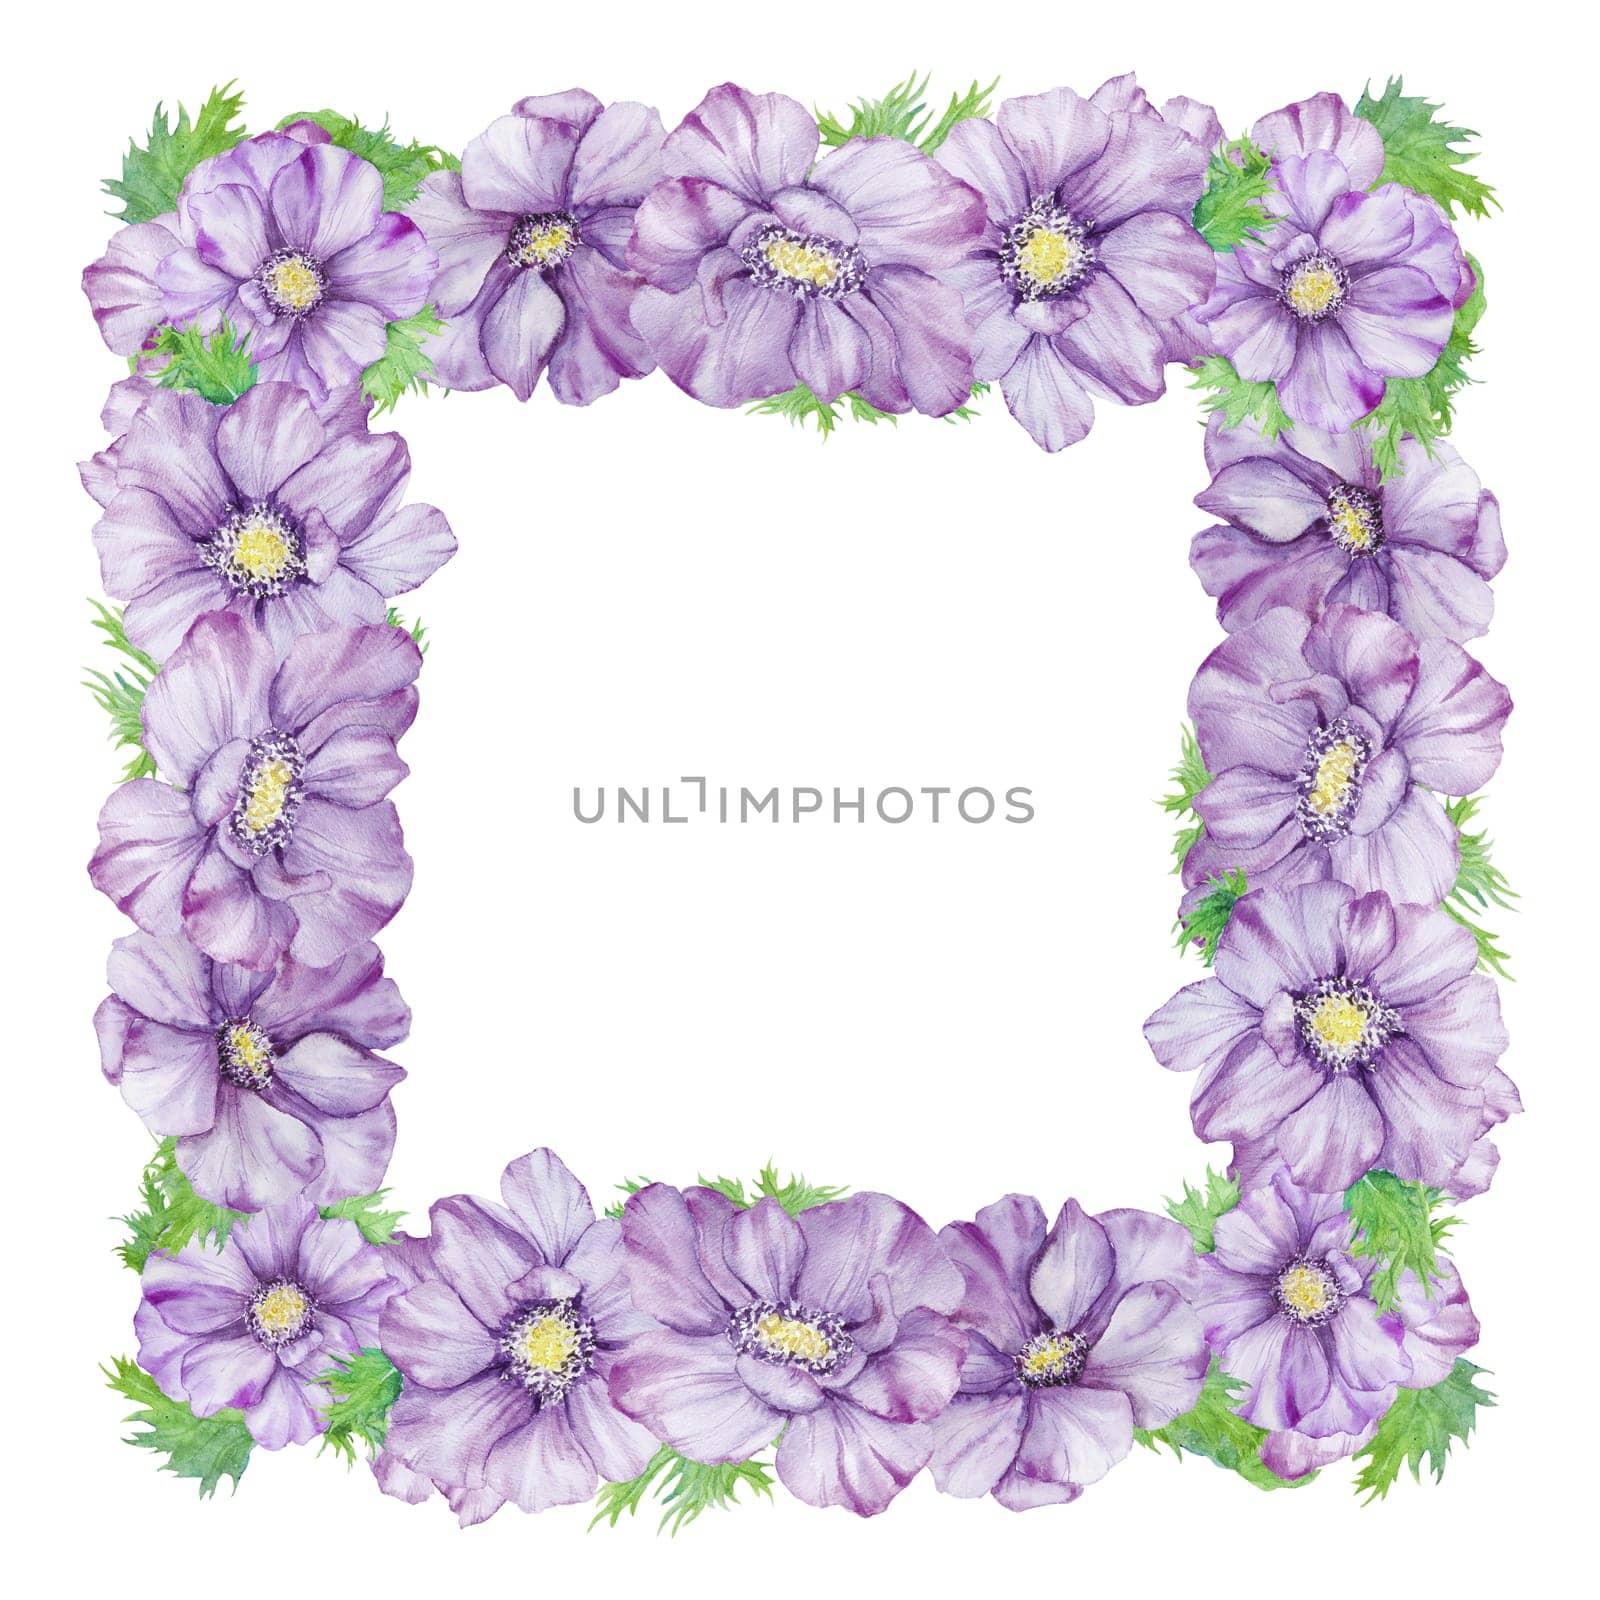 Watercolor hand drawn frame of purple anemones with green leaves isolated on white background. by florainlove_art